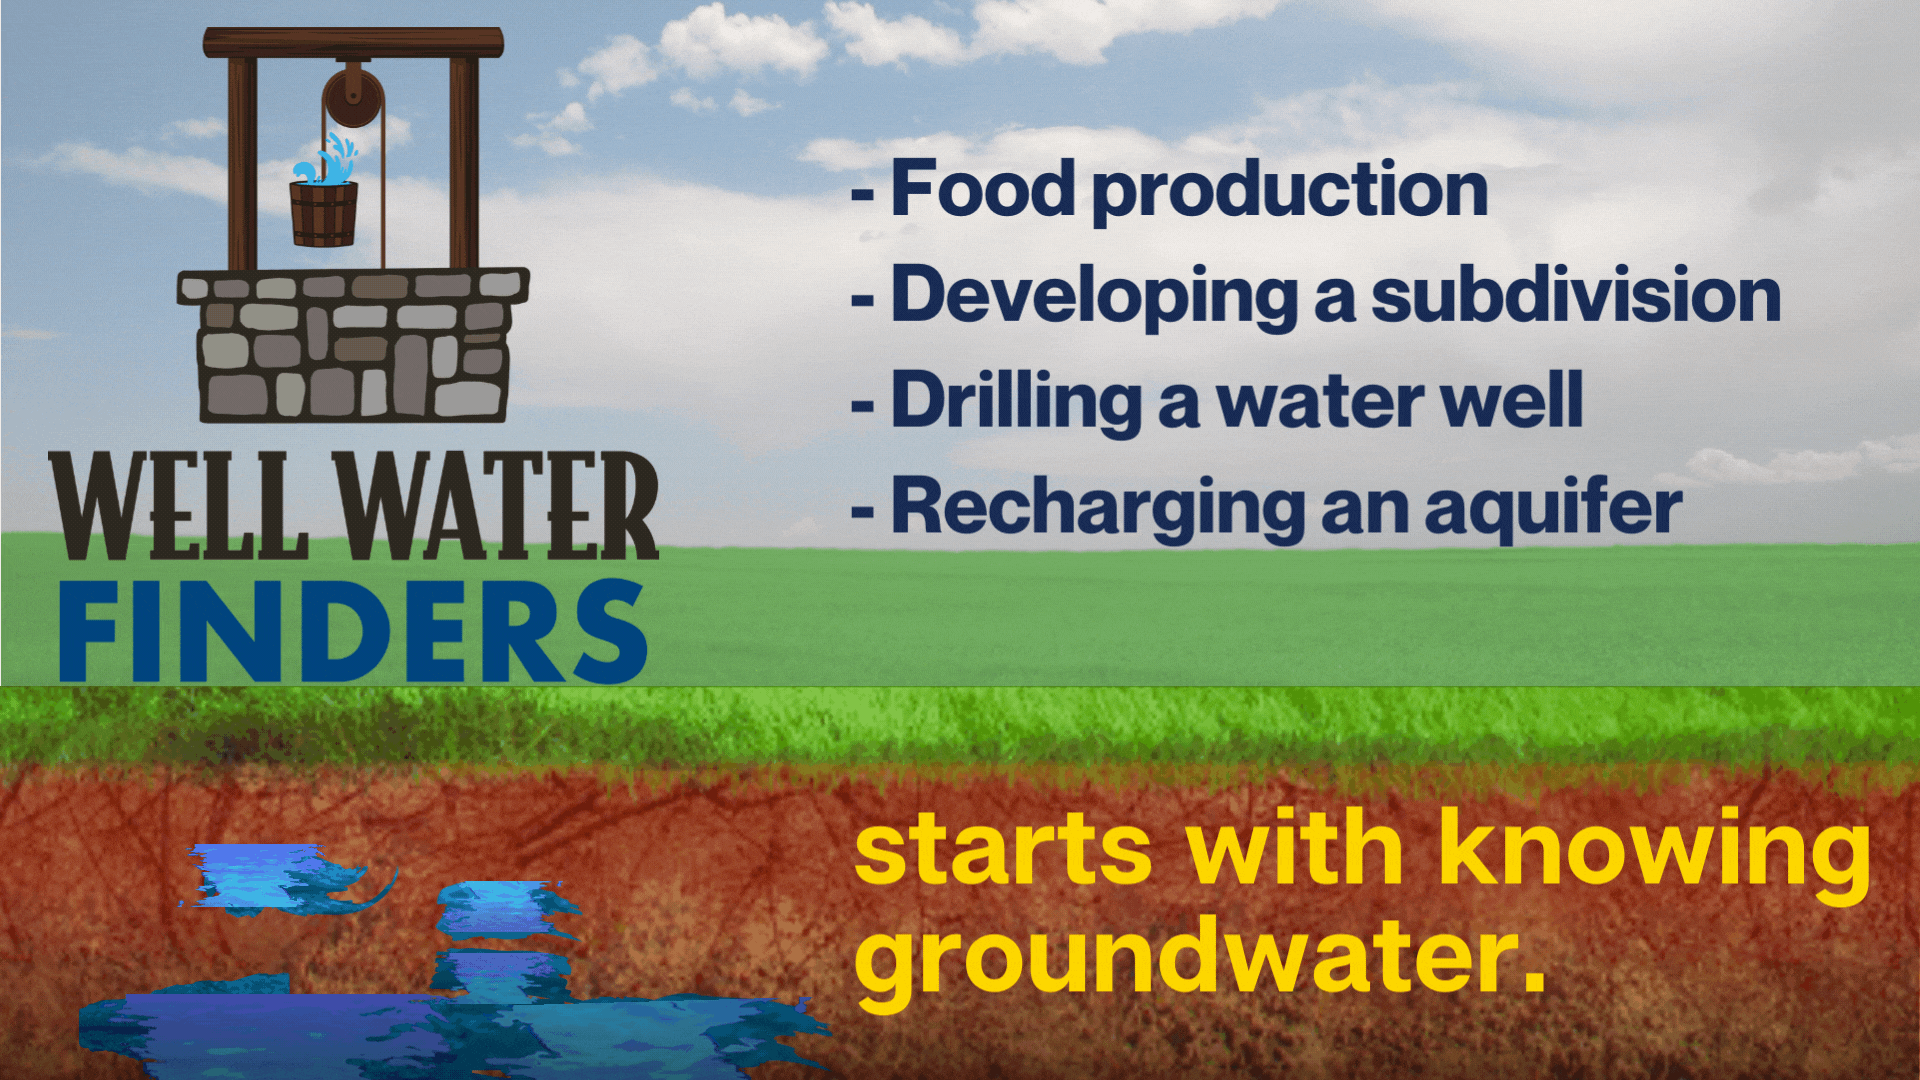 Find the Water Before Water Well Drilling - Well Water Finders